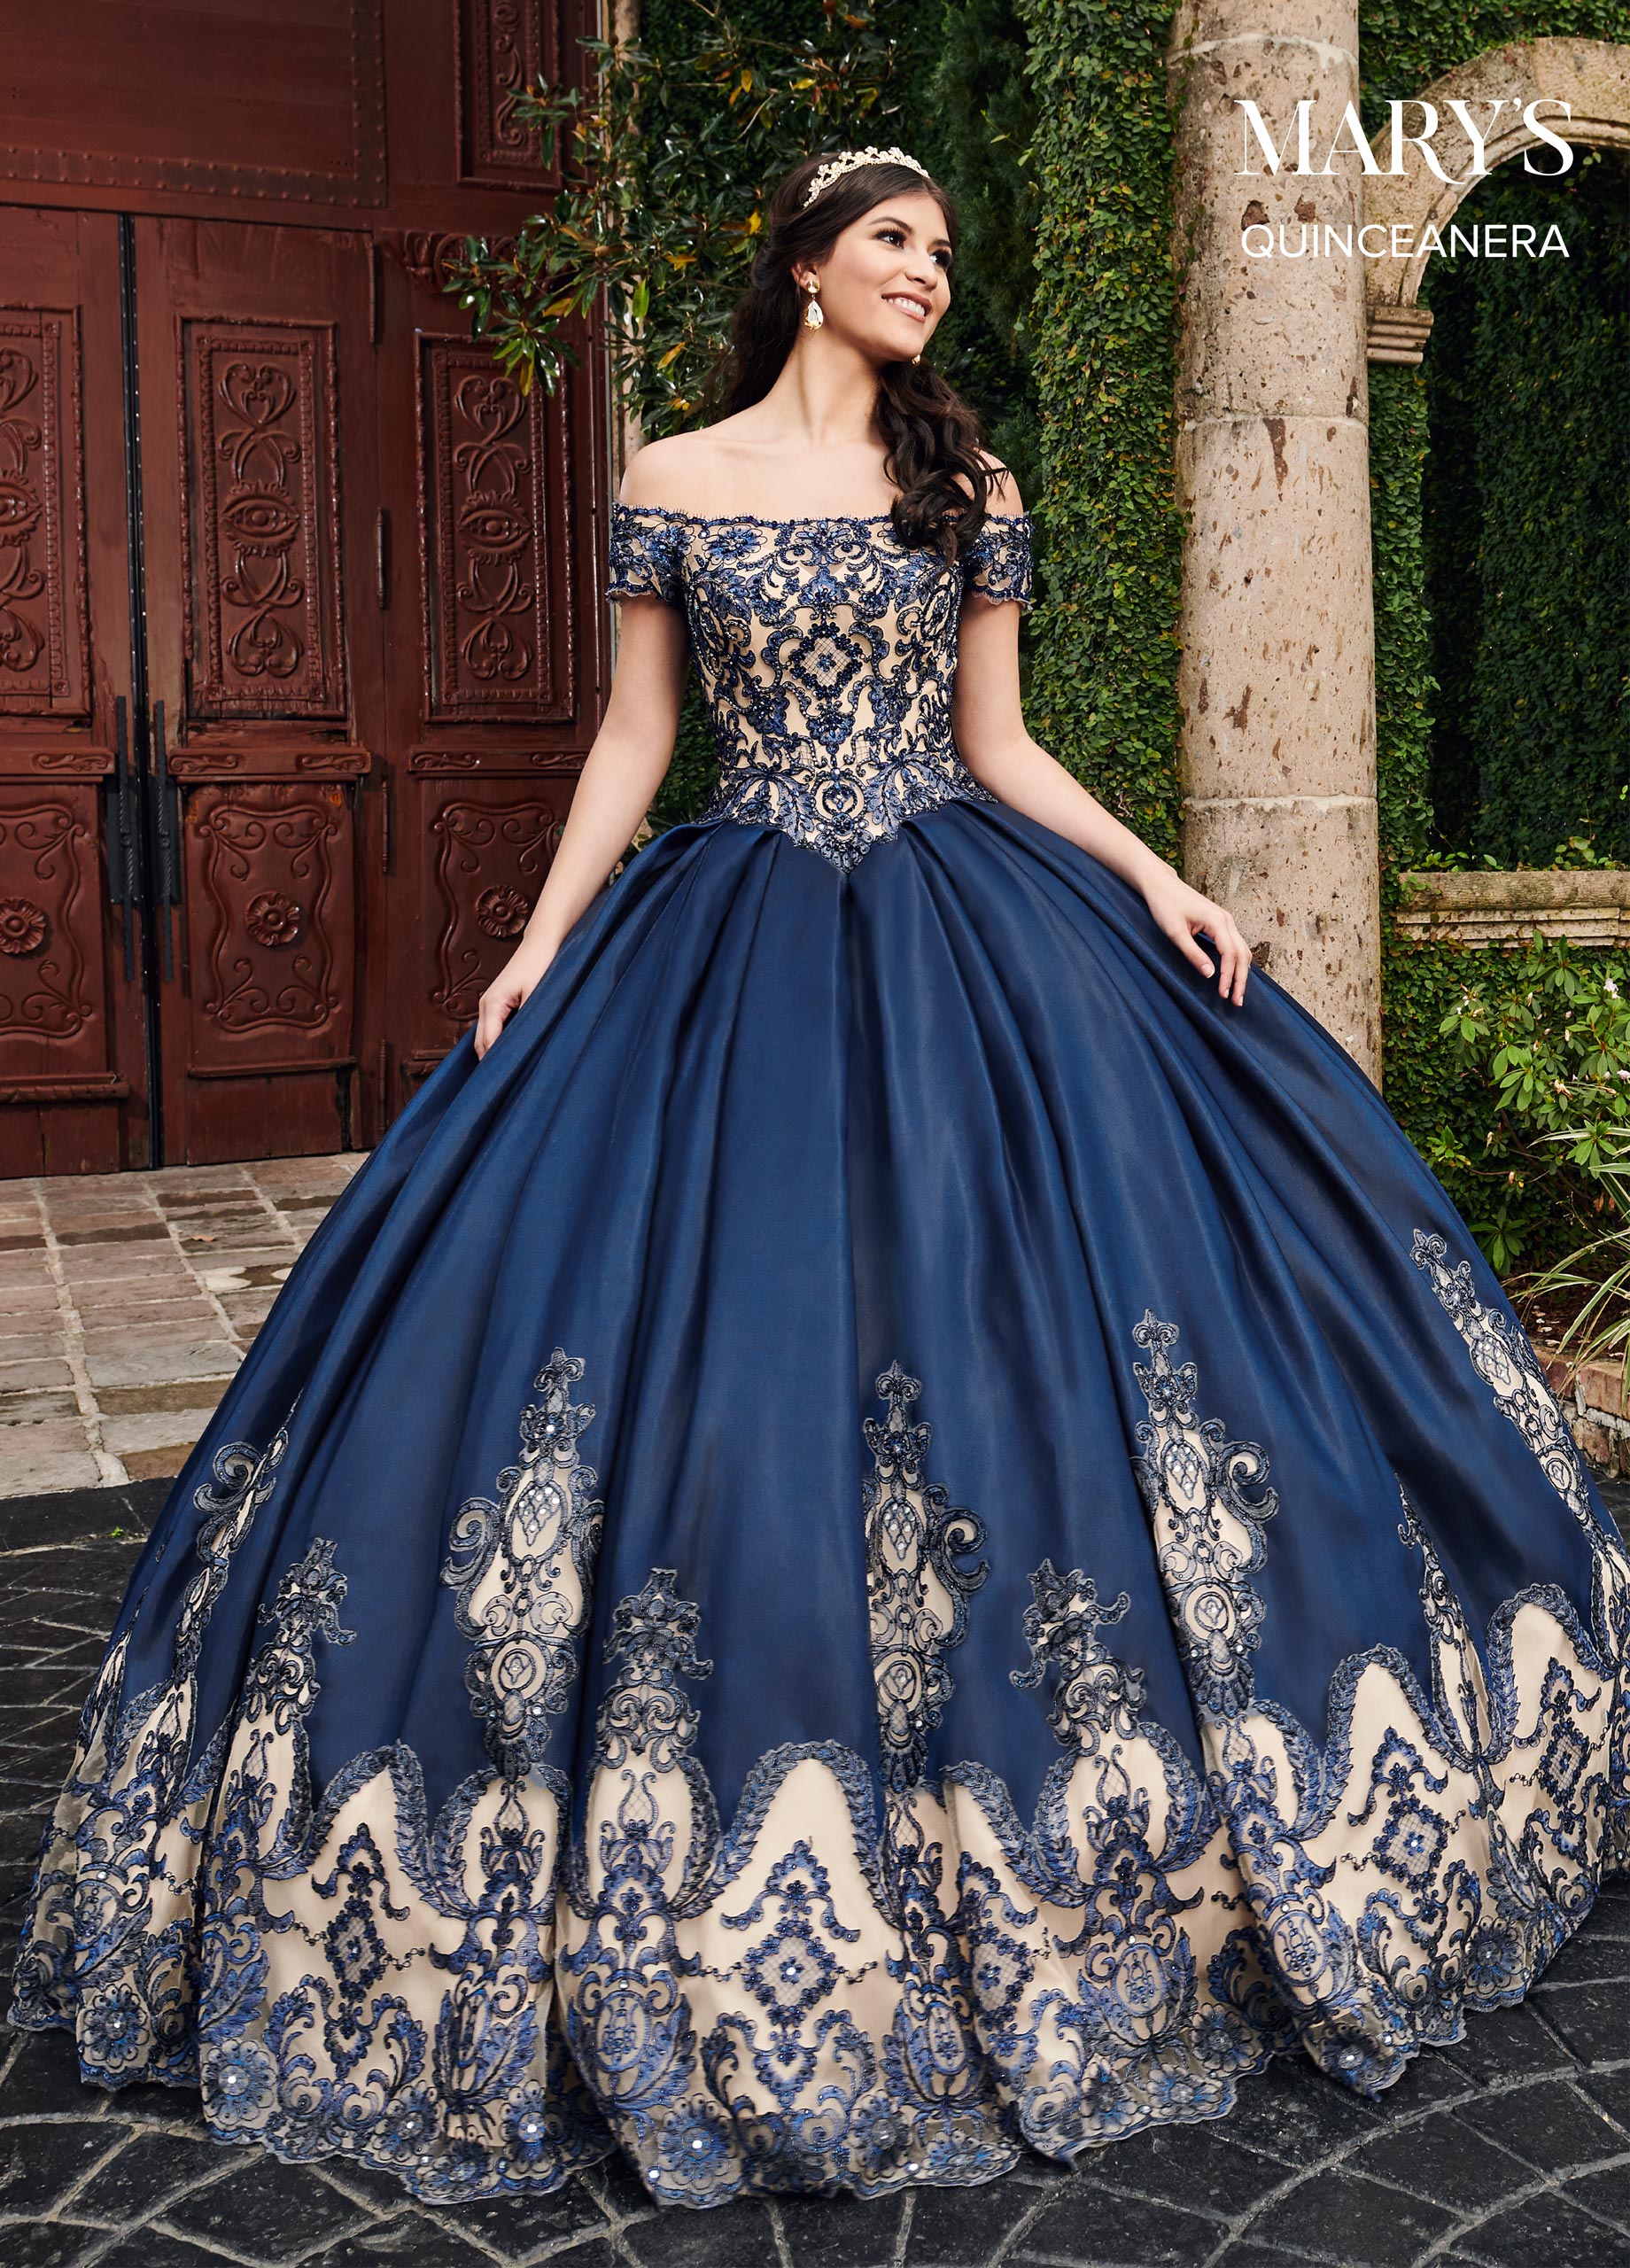 Marys Quinceanera Dresses In Navy/Nude Or Burgundy/Nude